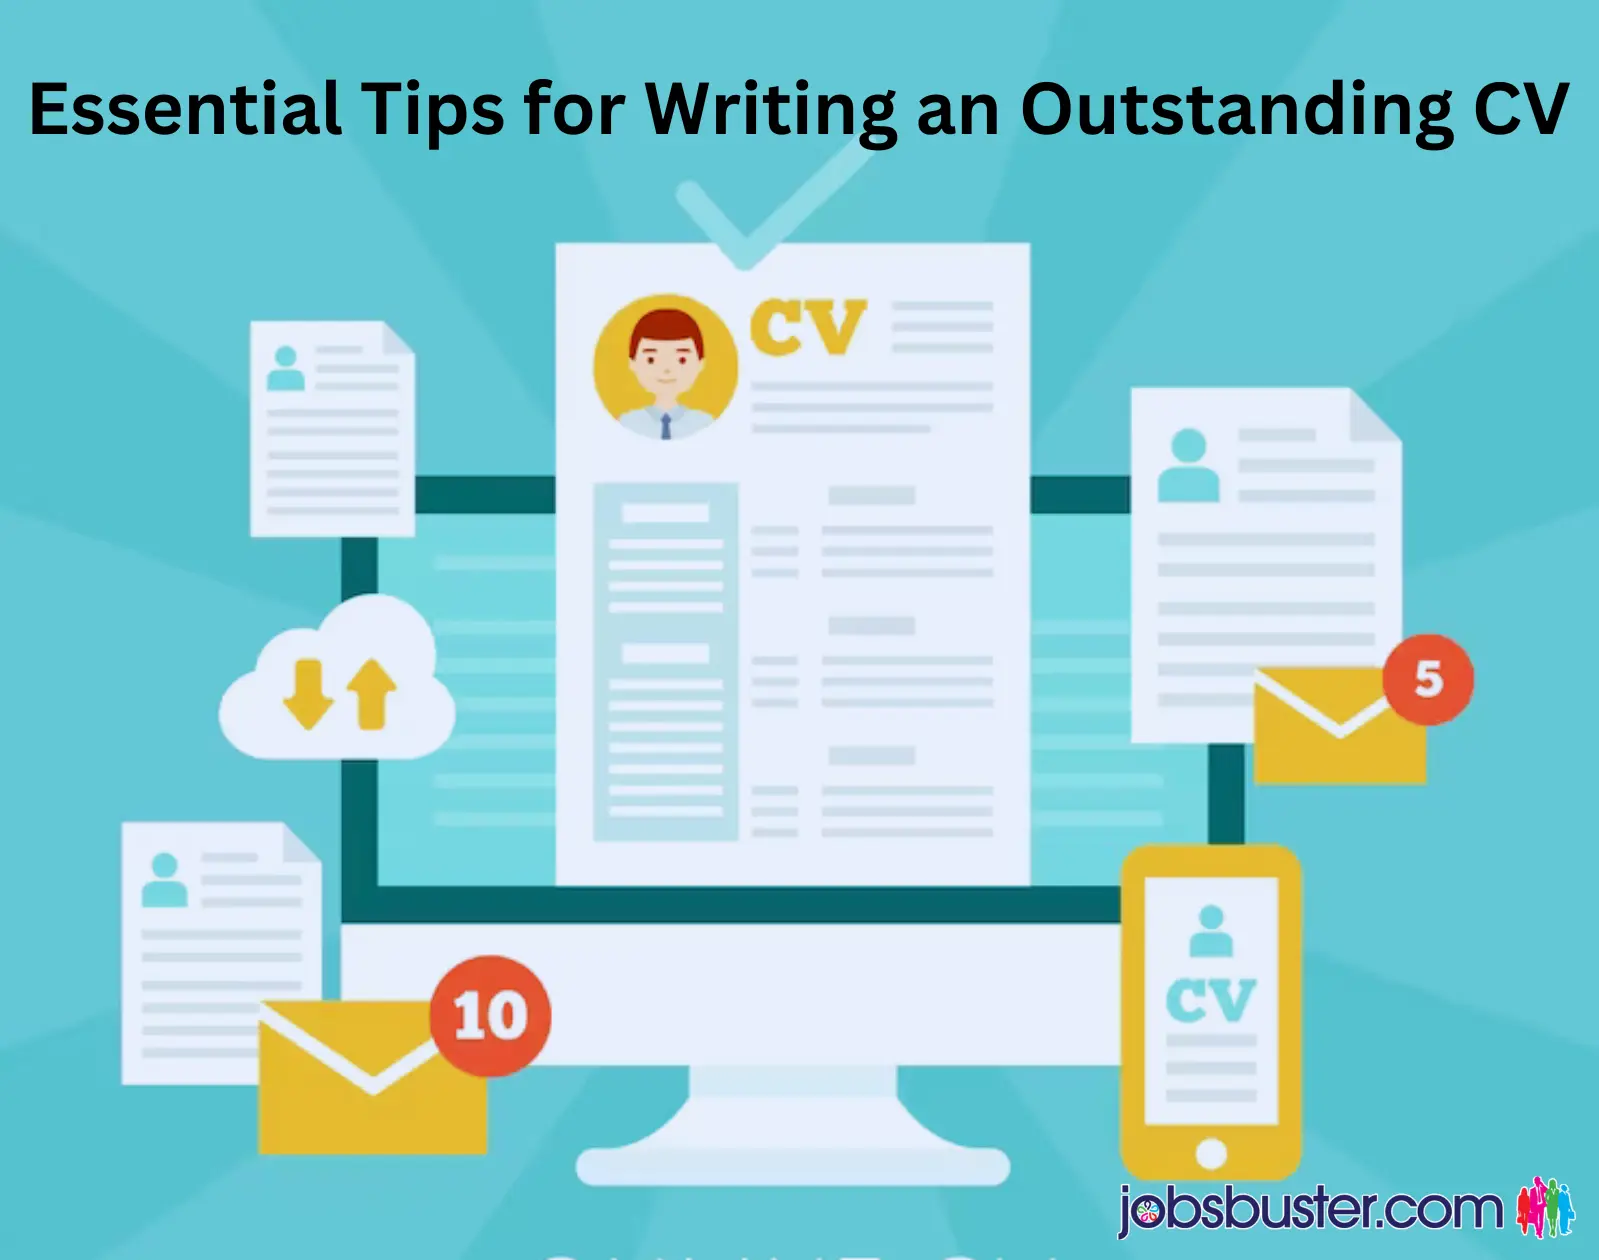 Essential Tips for Writing an Outstanding CV